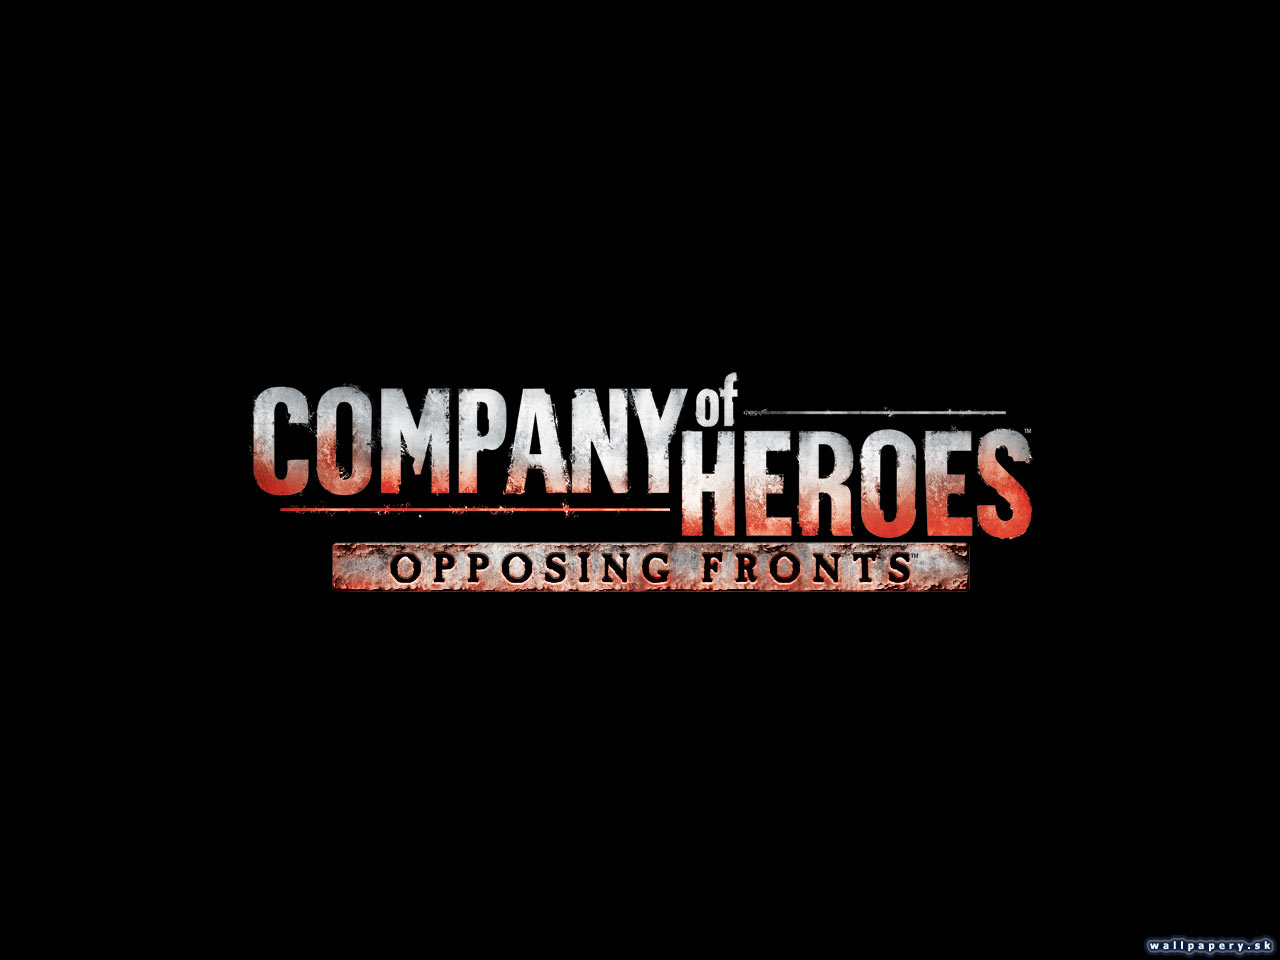 Company of Heroes: Opposing Fronts - wallpaper 5